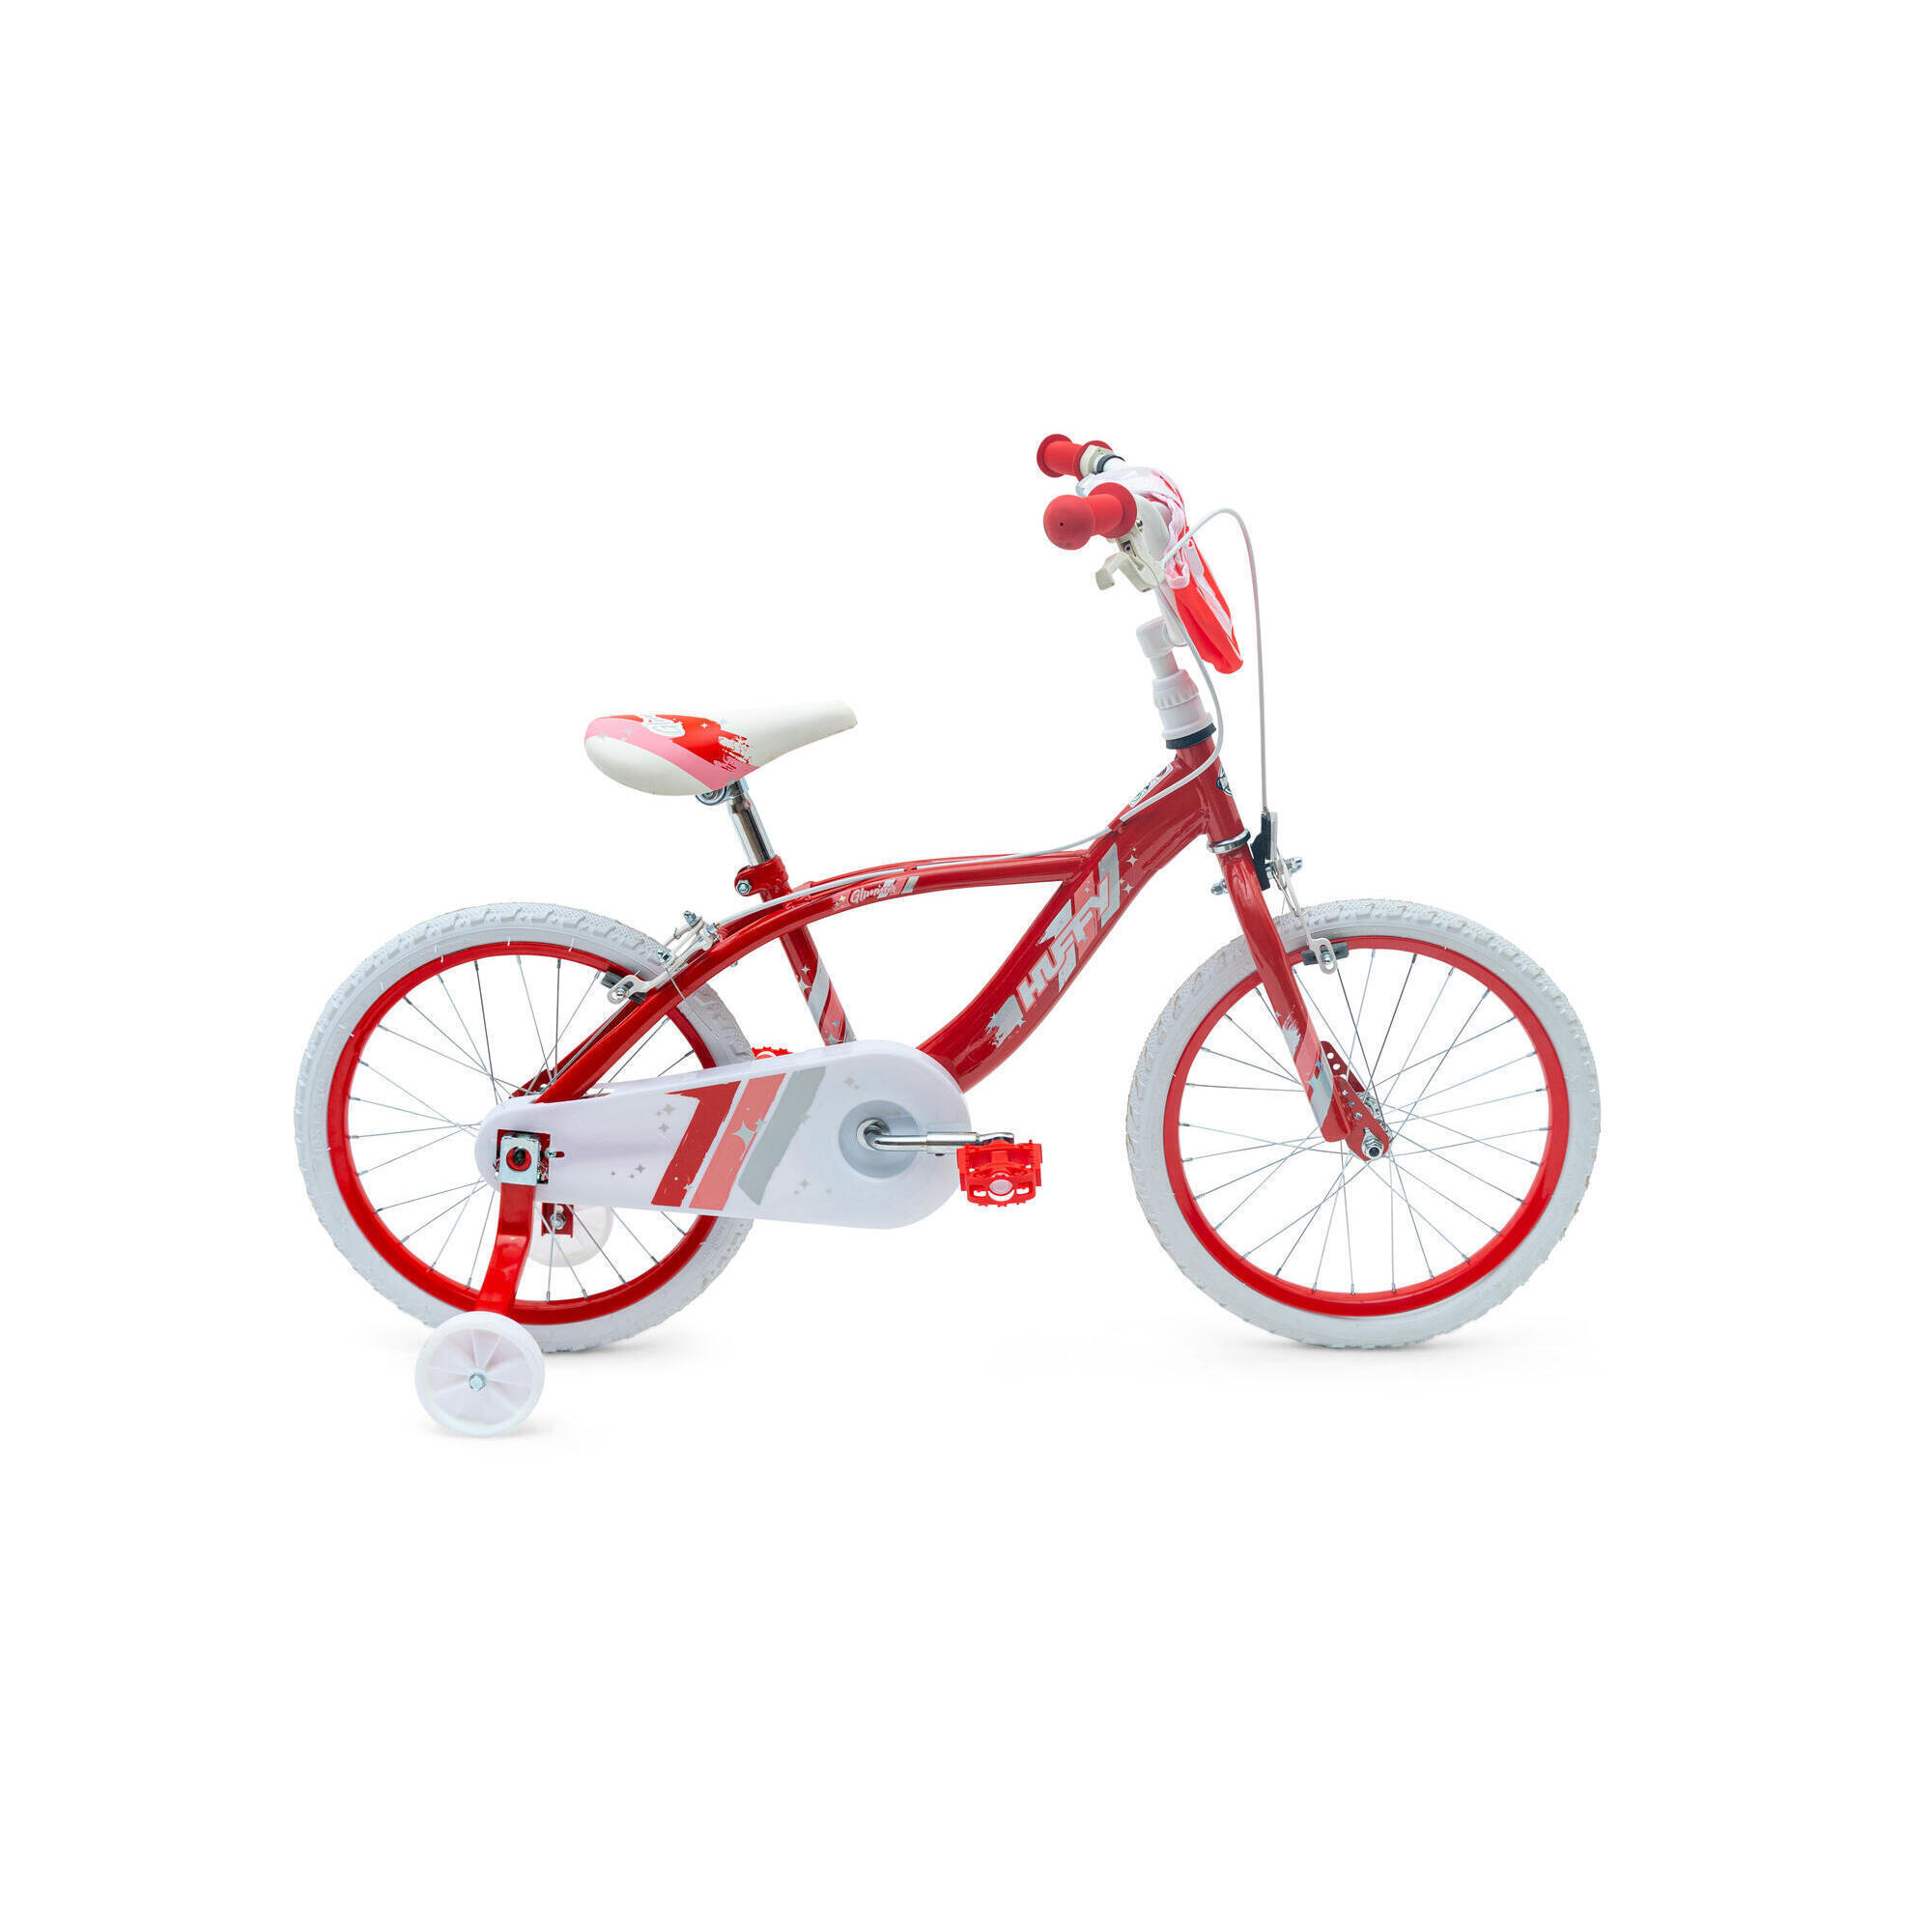 Huffy Glimmer 18" Girls Bike Red 5-7yrs Quick Connect + Stabilisers 2/7